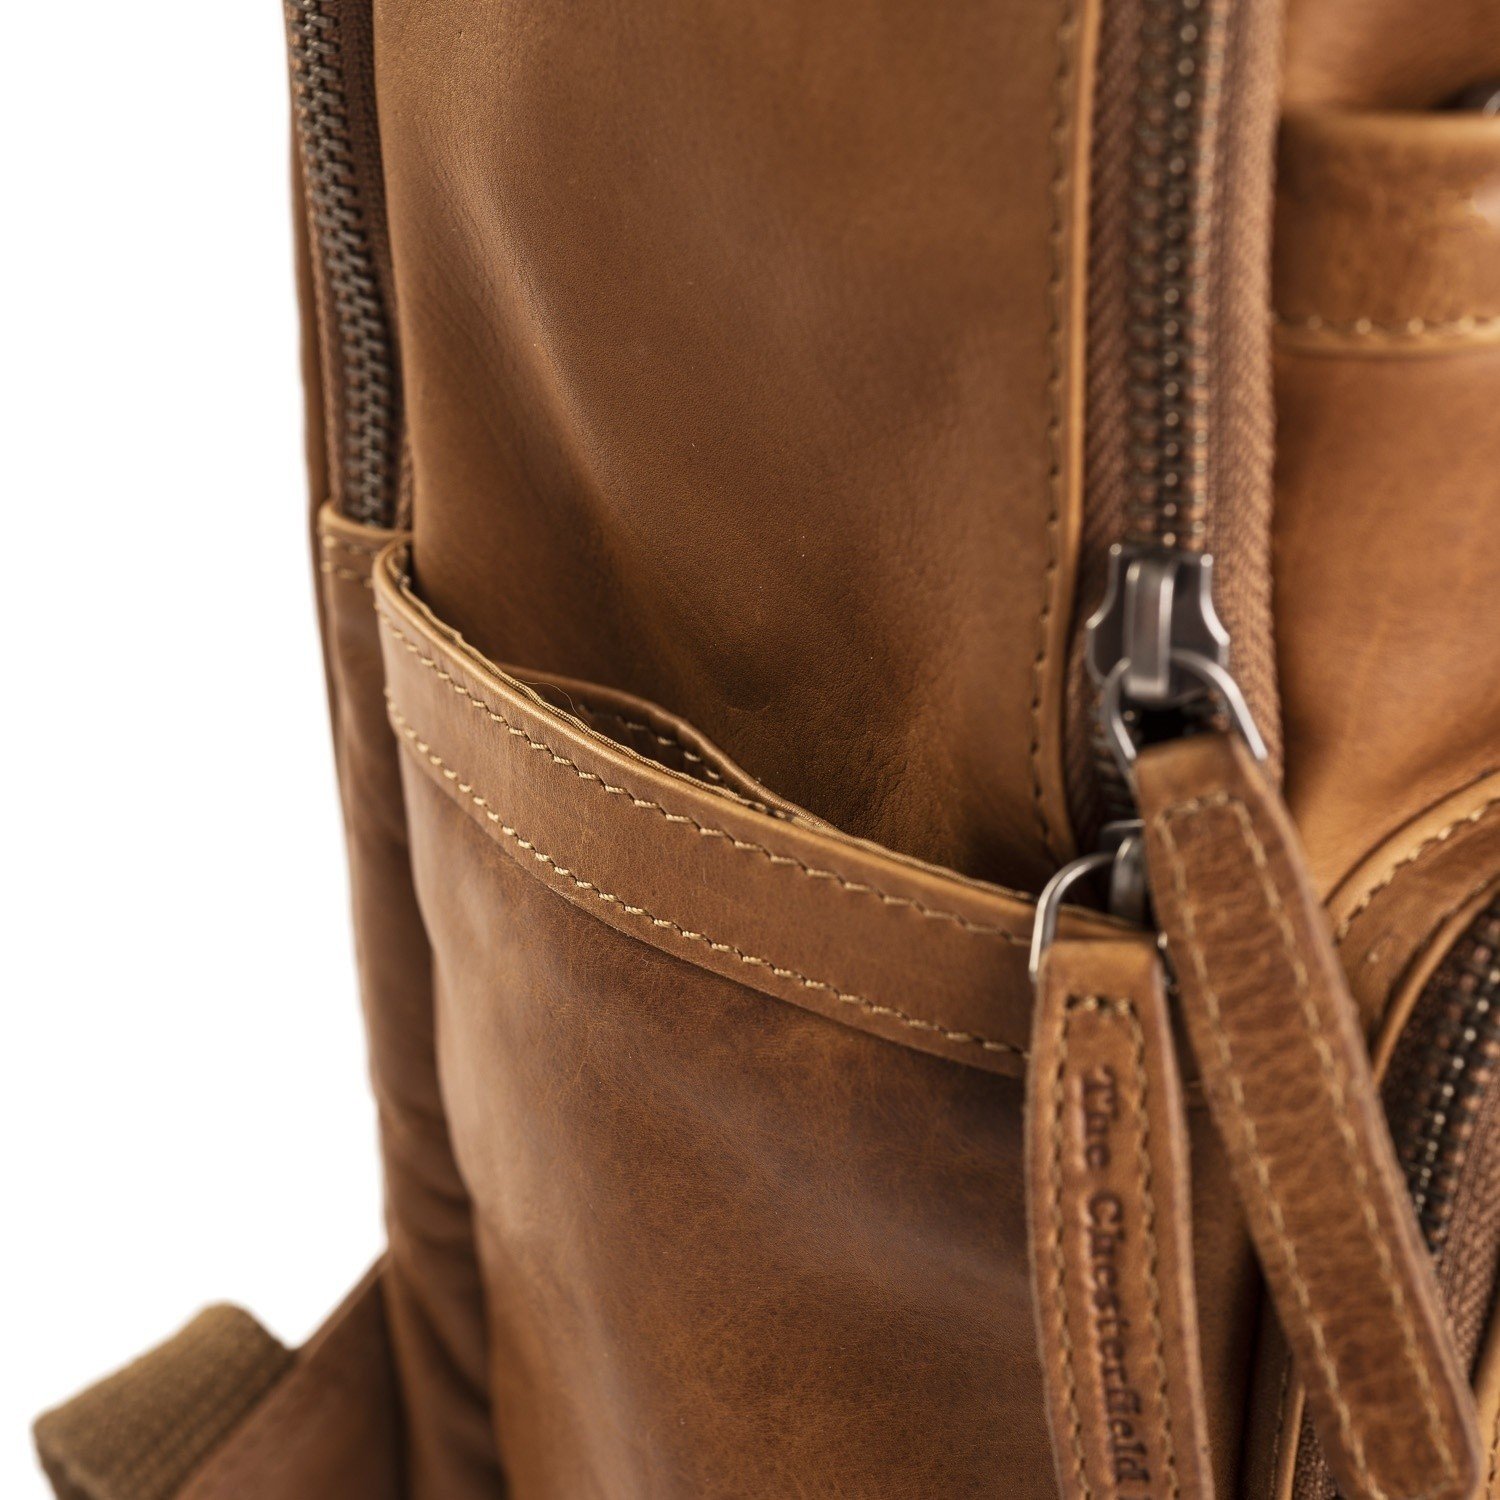 Austin Brand Leather - Cognac The Backpack Chesterfield